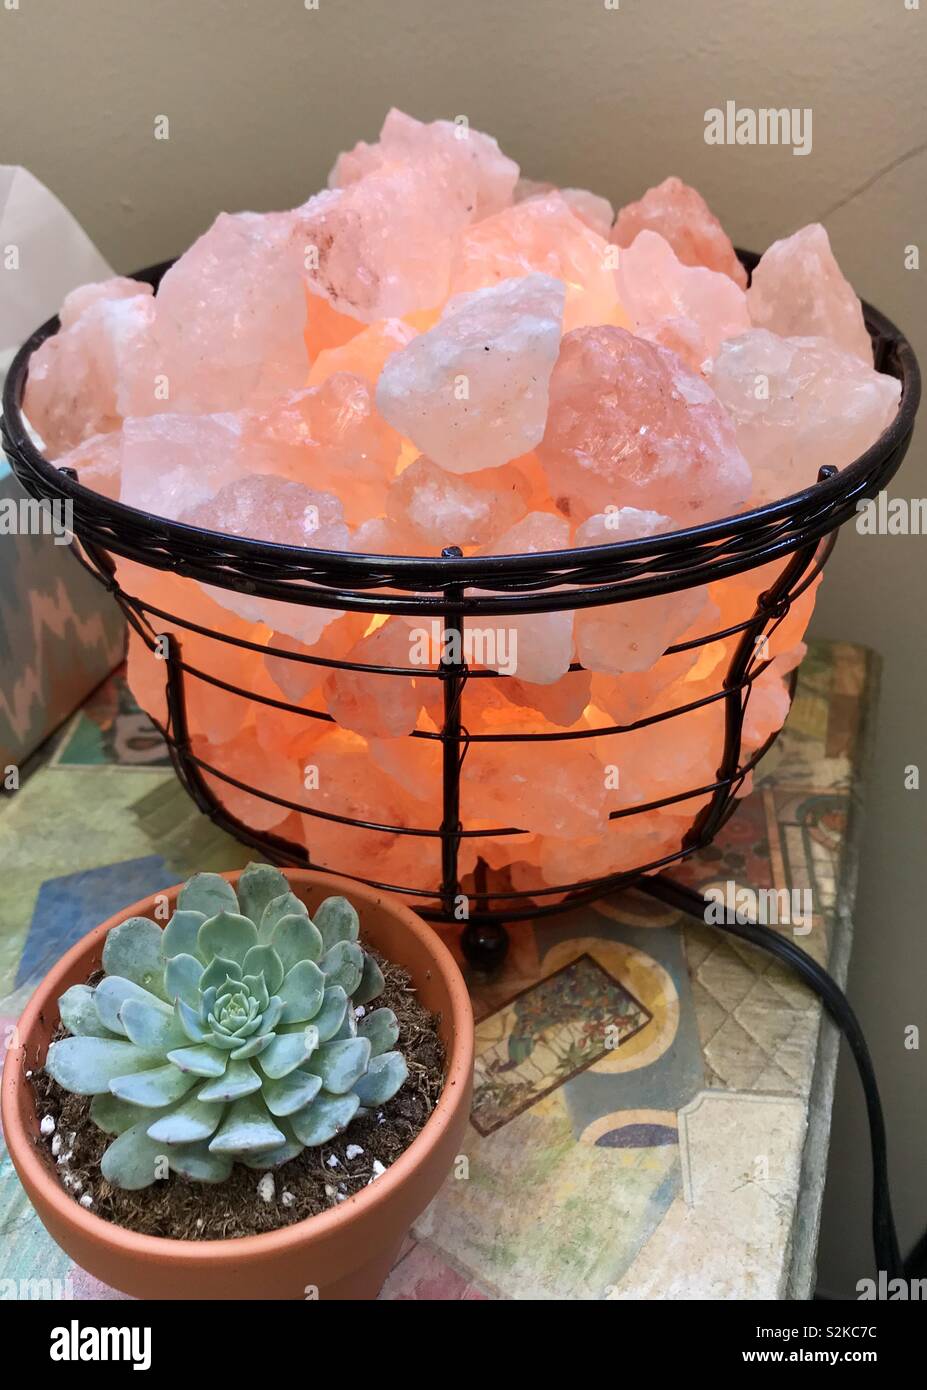 Himalayan salt rock lamp basket and succulent plant on decoupage table stand Stock Photo